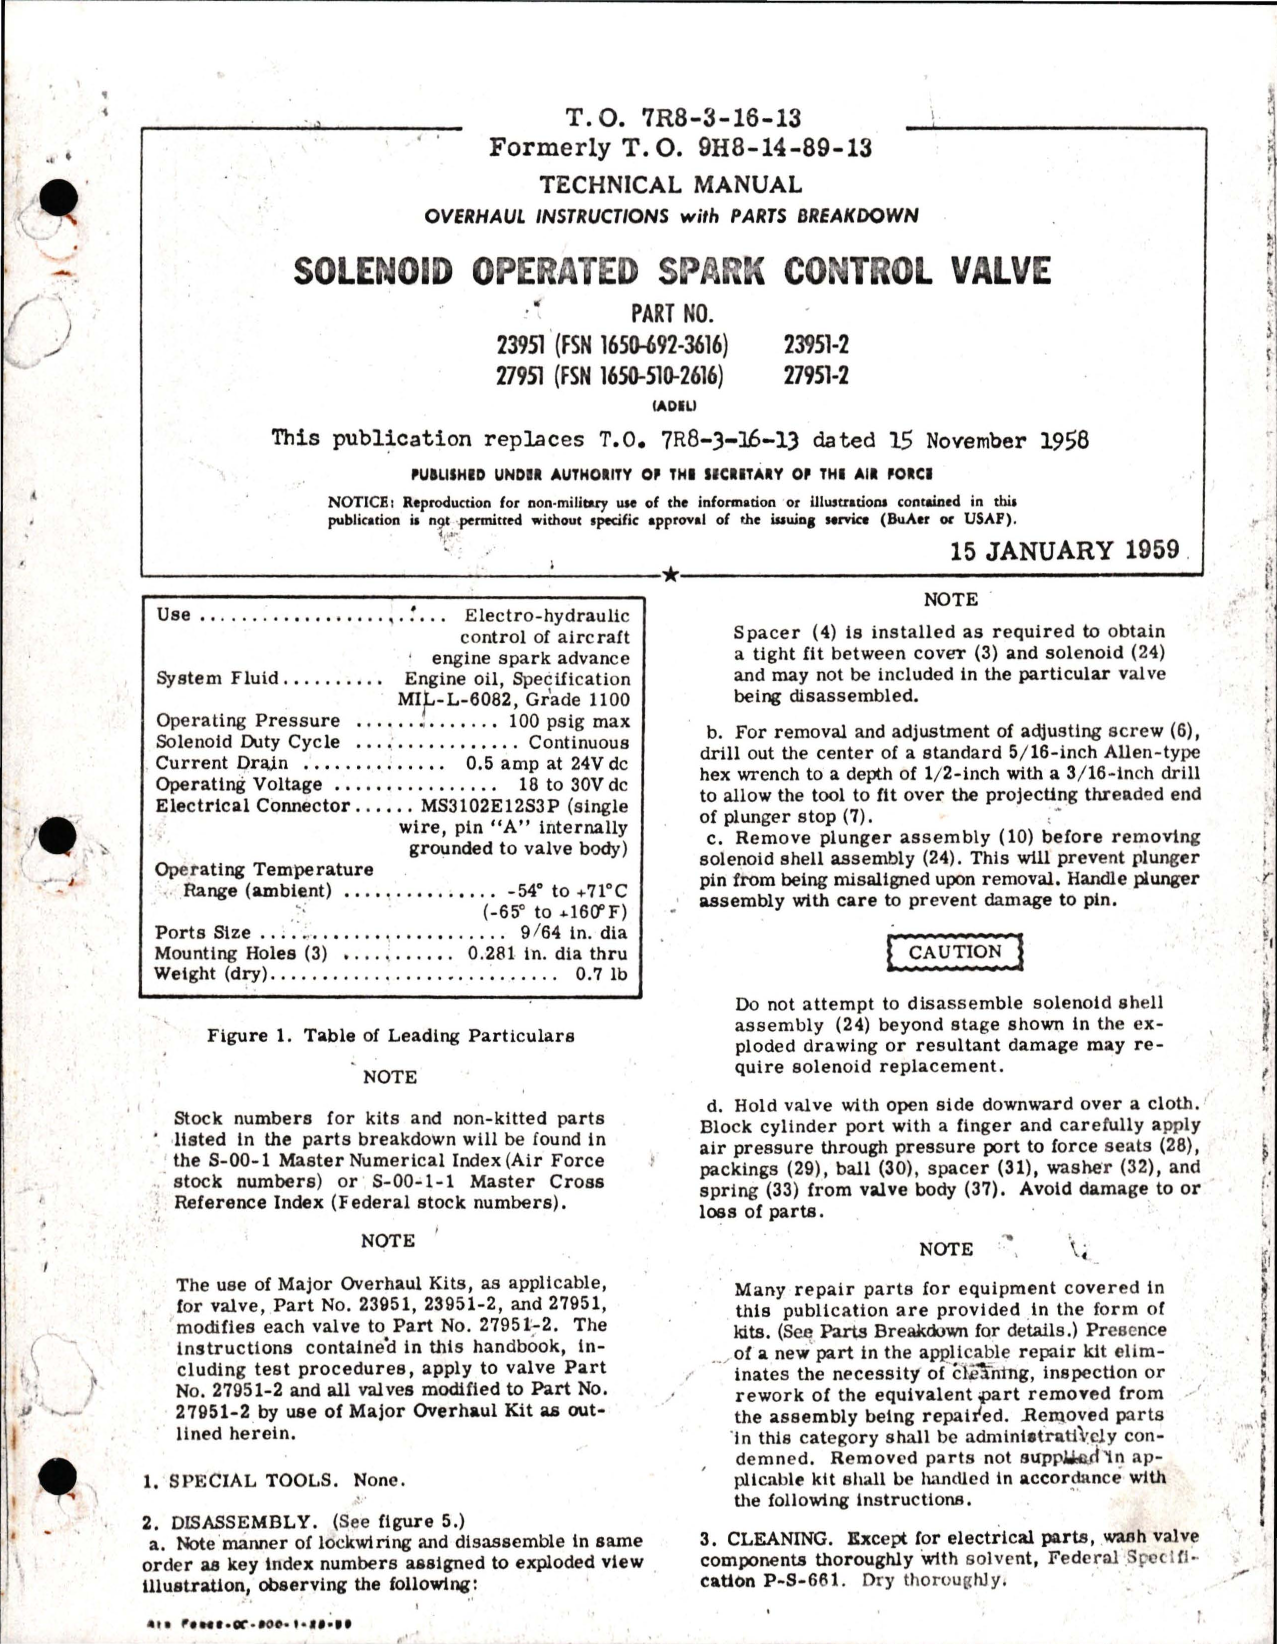 Sample page 1 from AirCorps Library document: Overhaul Instructions with Parts Breakdown for Solenoid Operated Spark Control Valve - Parts 23951, 27951, 23951-2, and 27951-2, Adel